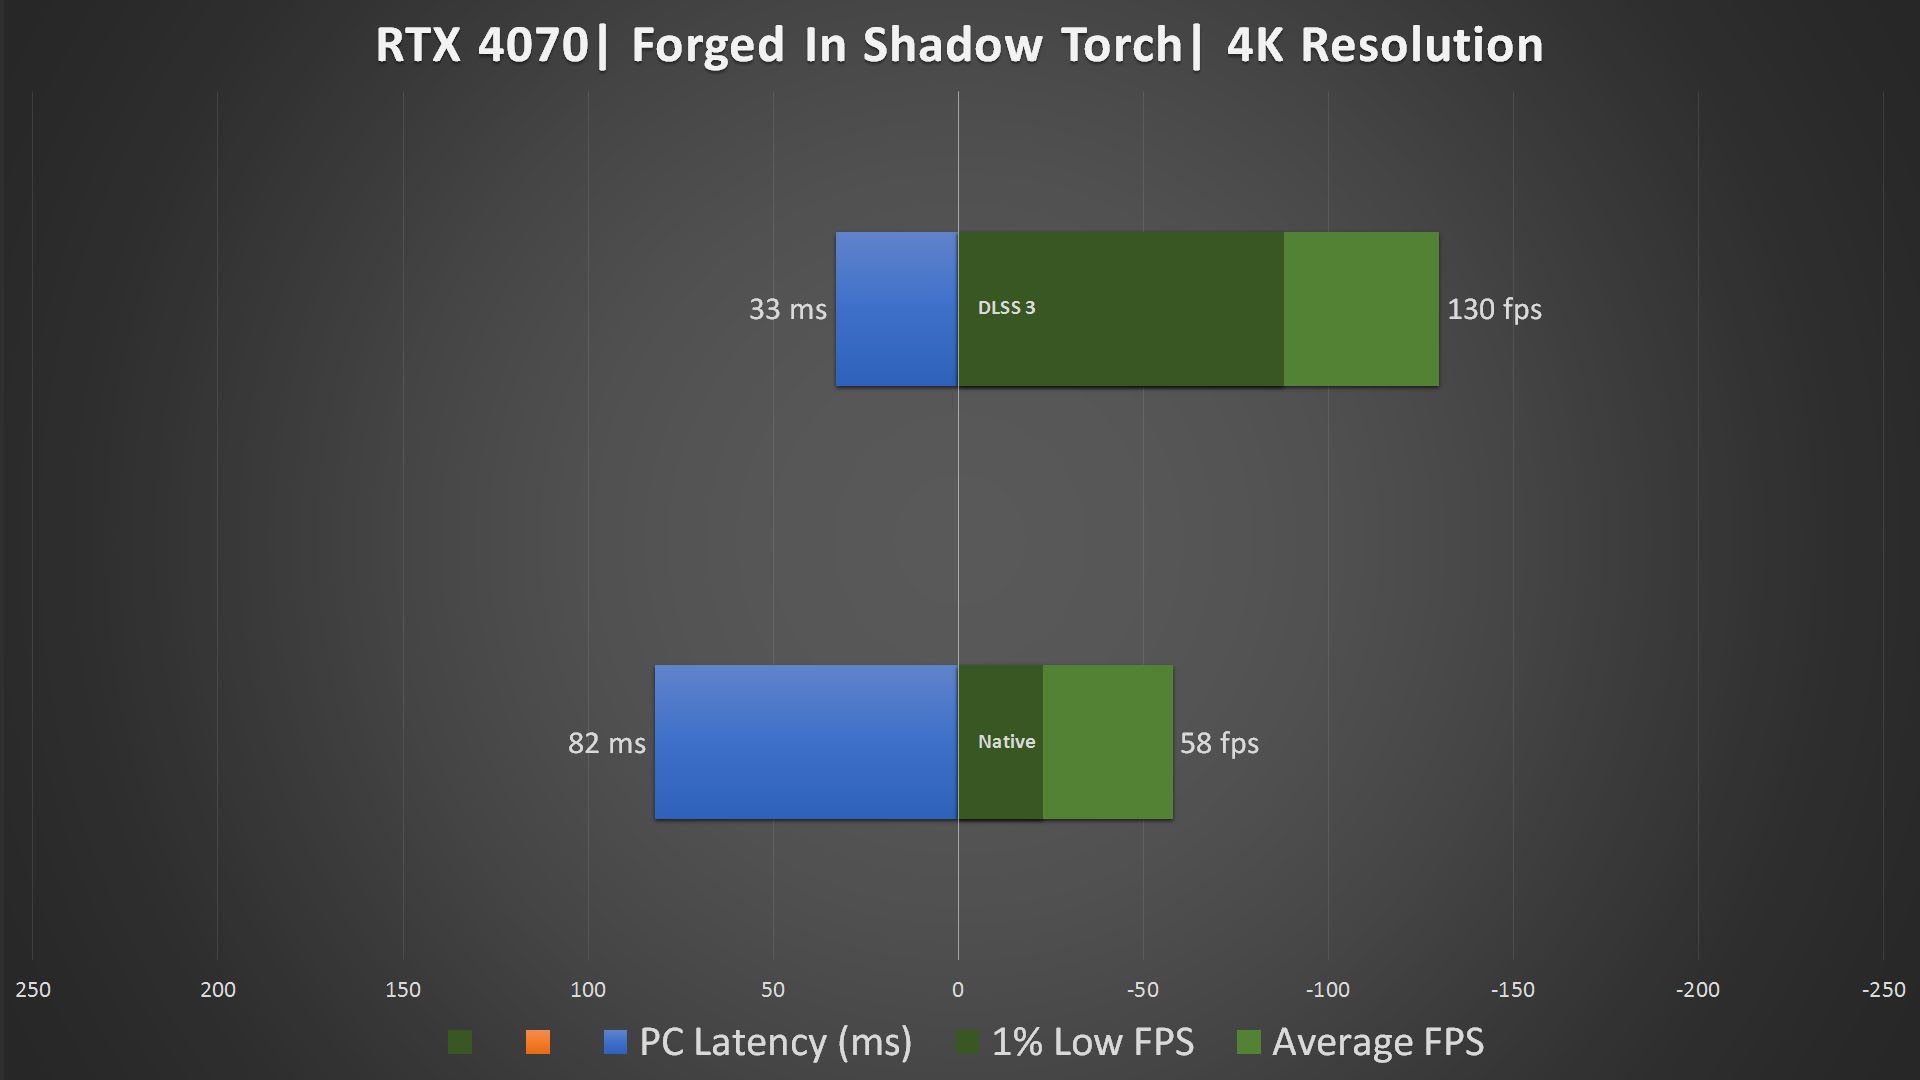 PNY RTX 4070 Verto Epic X DLSS 3 Benchmark Forged In Shadow Torch